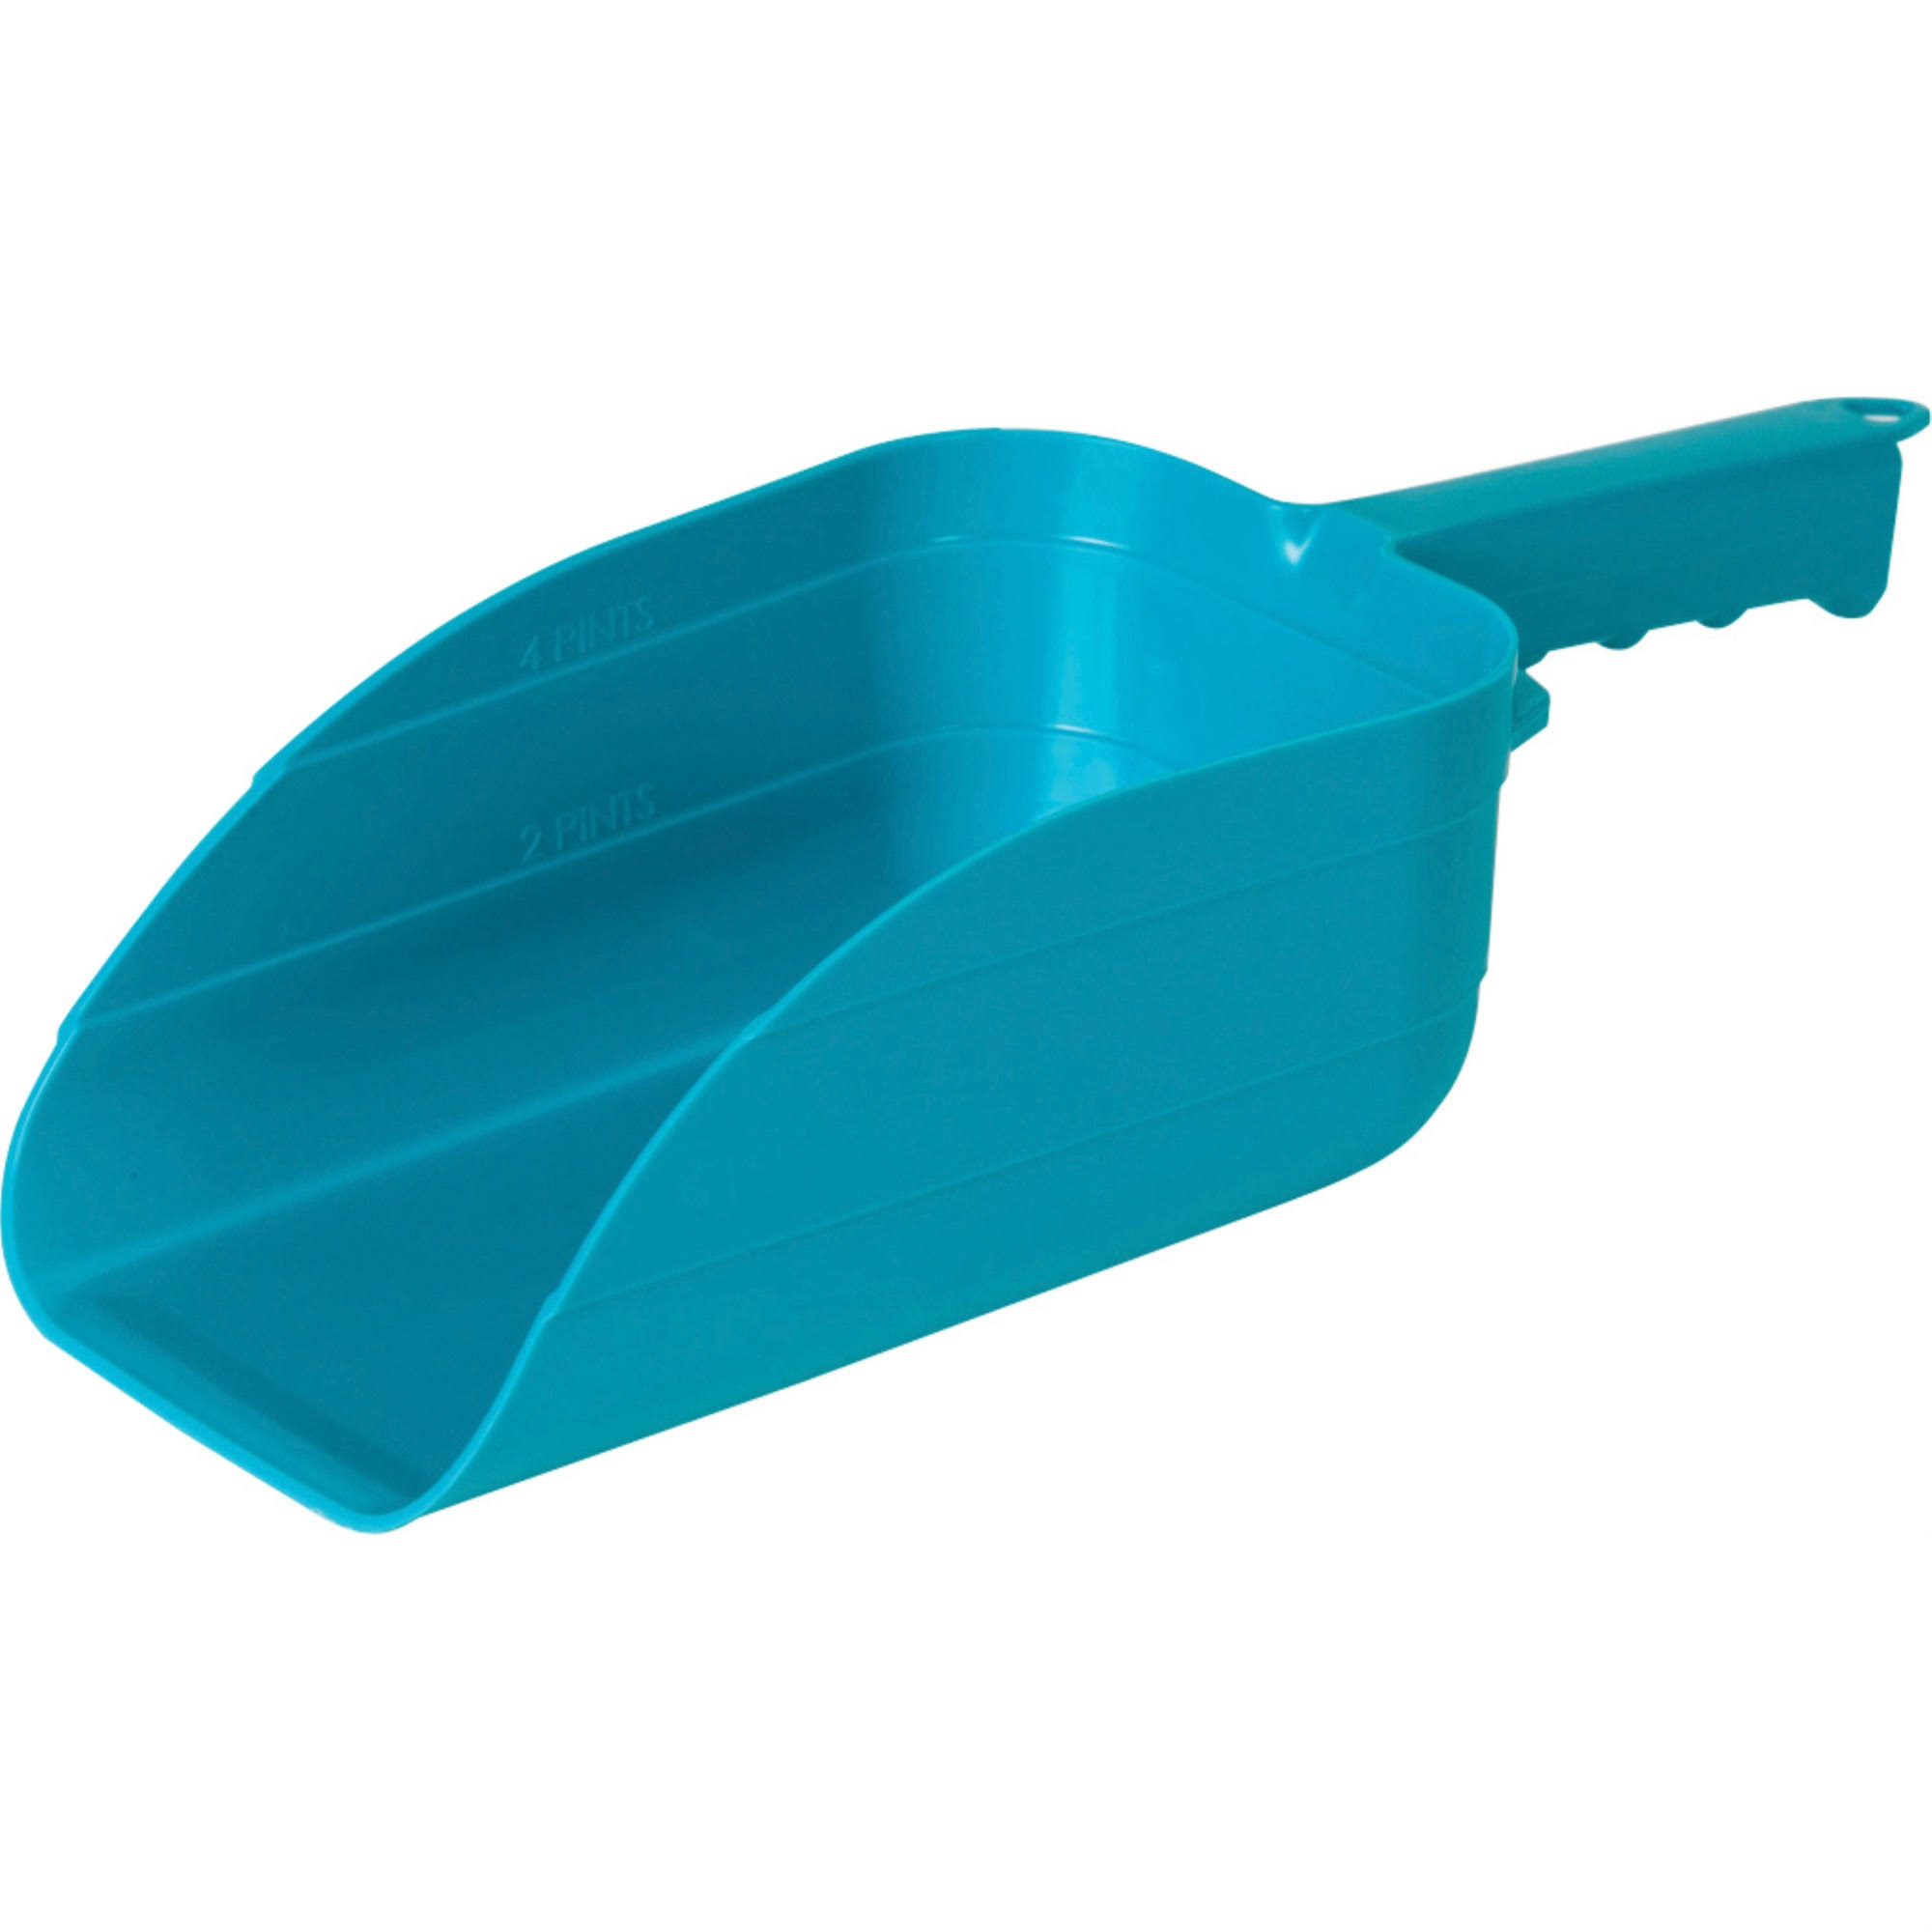 Miller Little Giant Plastic Feed Scoop Teal, 1 Count